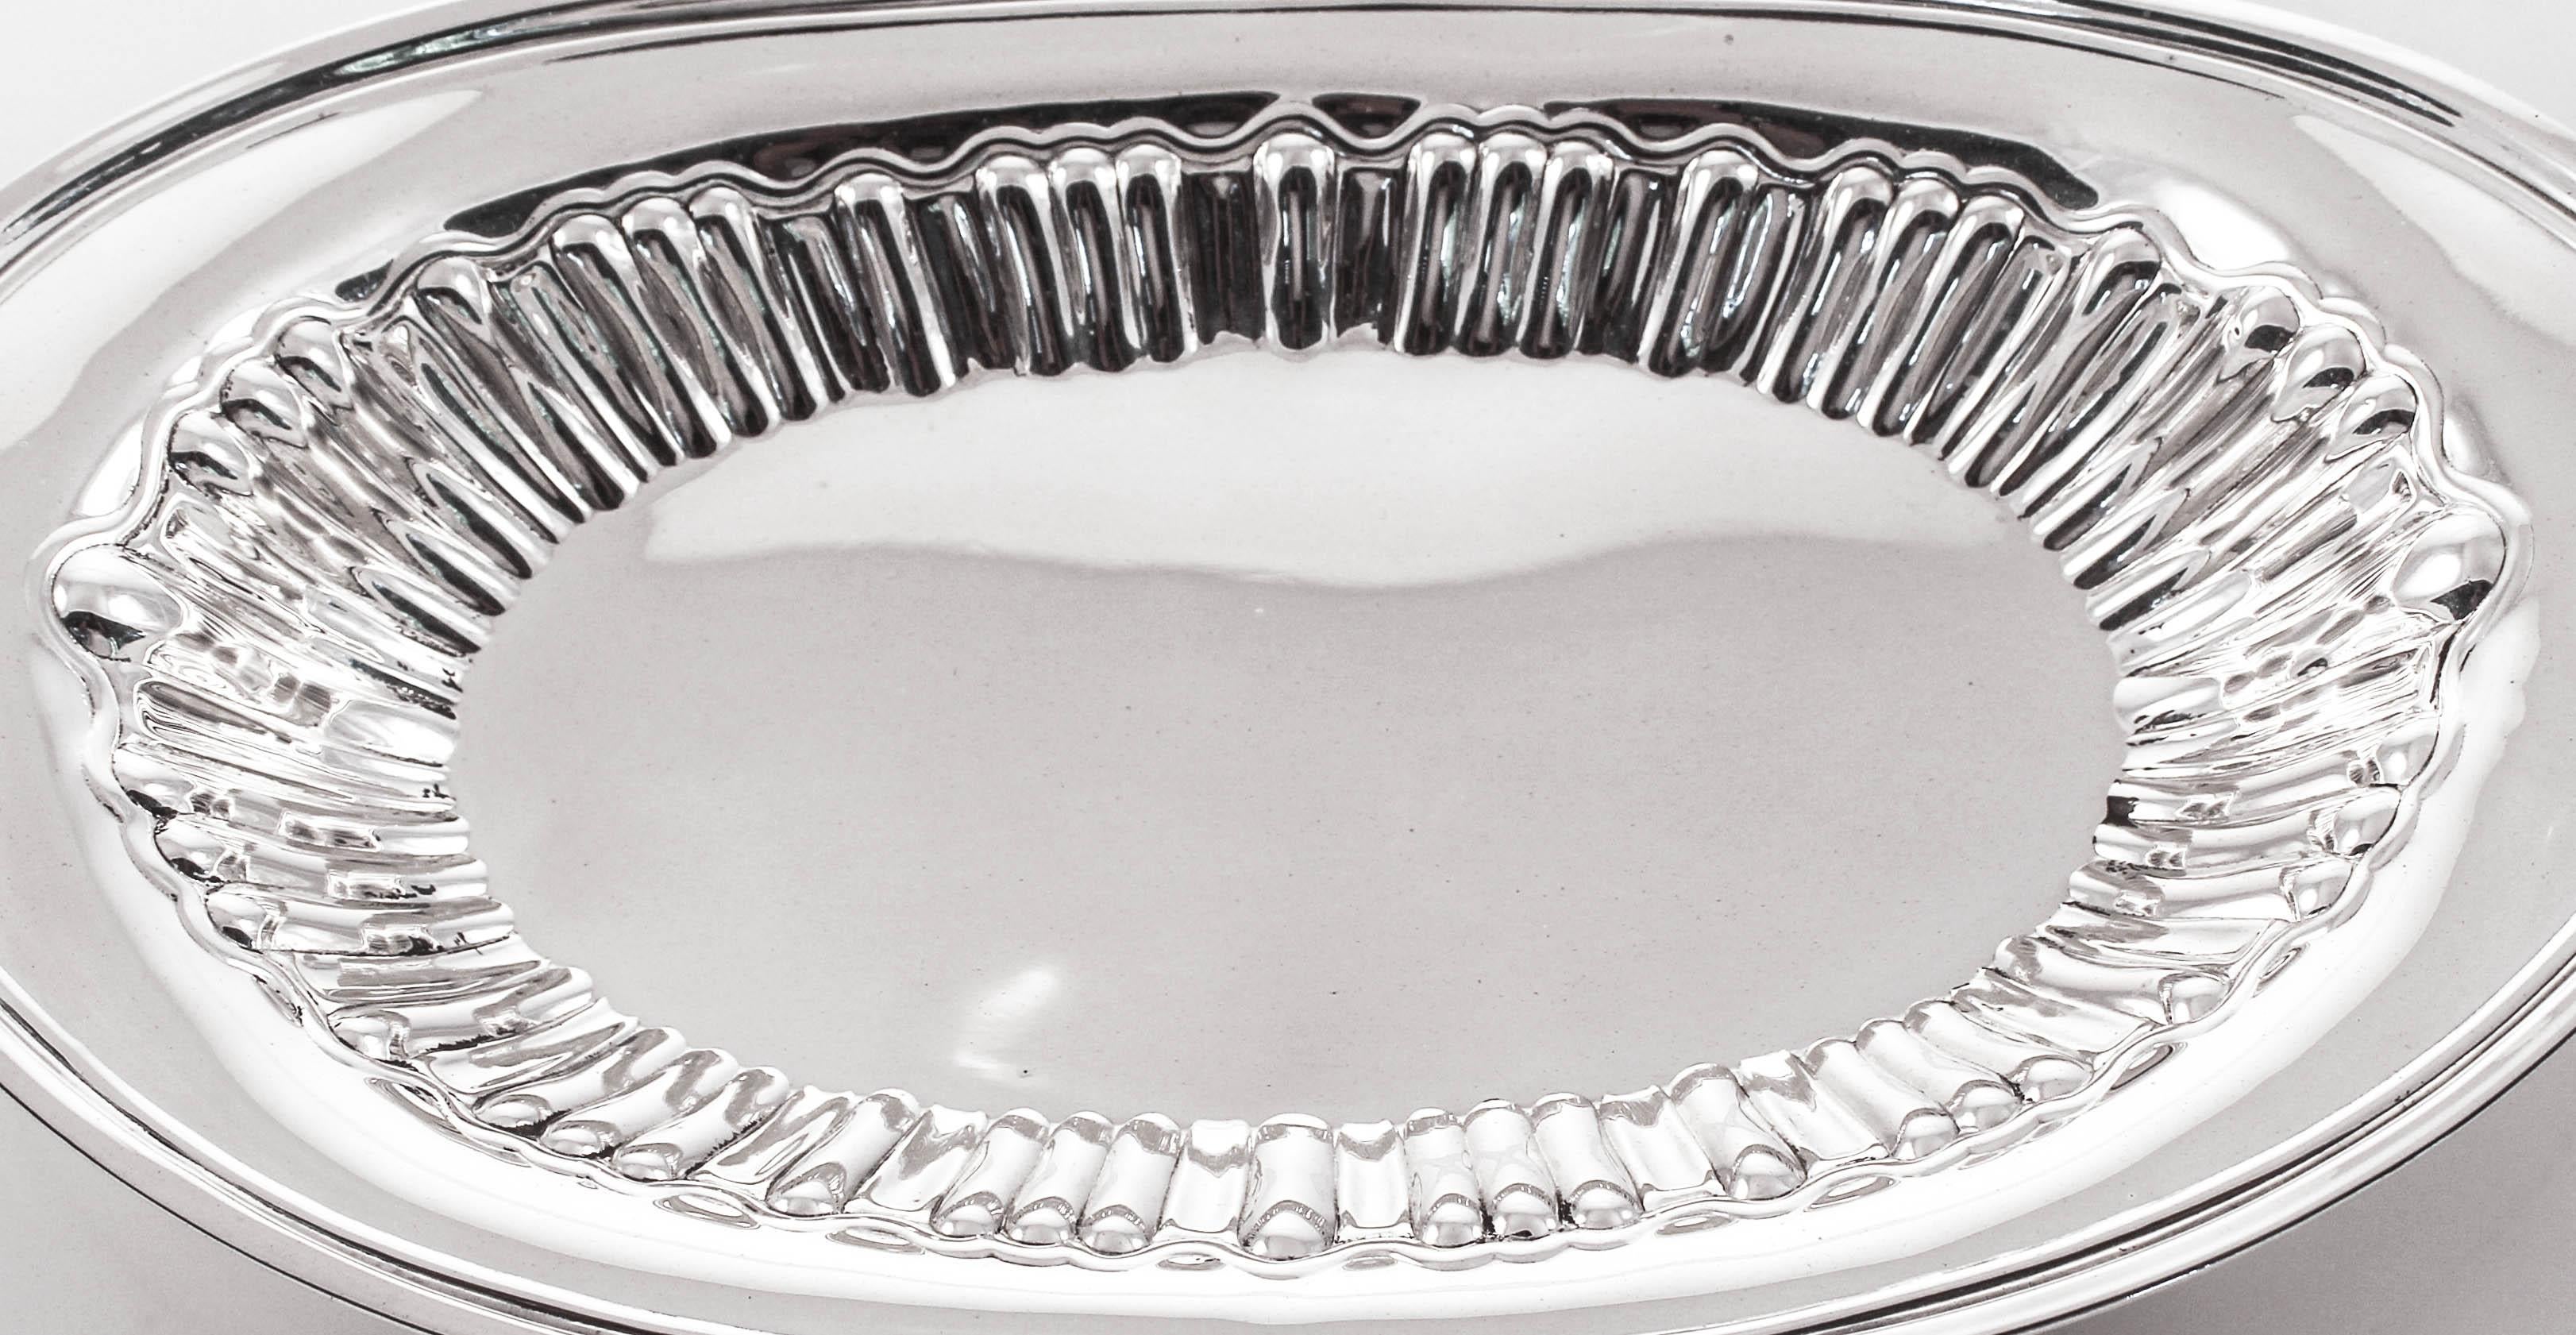 Being offered is a sterling silver breadbasket by the Amston Silver Company of Meriden, Connecticut. It has a sleek modern look with a scalloped interior. The perfect size for an intimate dinner and so practical for just about anything you want to